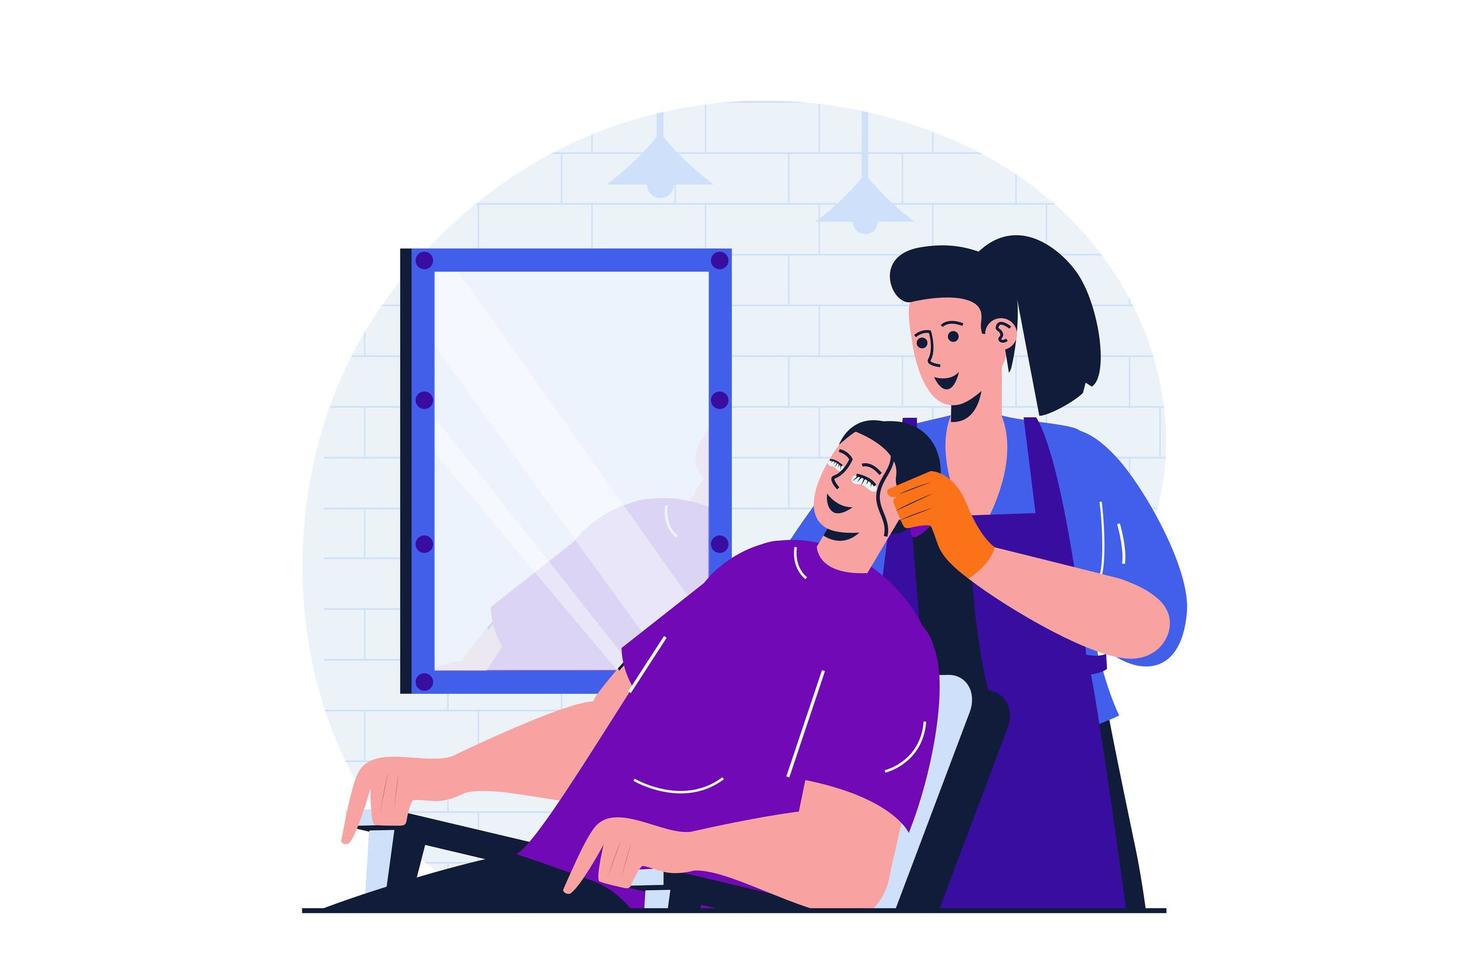 Beauty salon modern flat concept for web banner design. Woman hairdresser coloring hair of client. Female visitor enjoys care procedure sitting in chair. Vector illustration with isolated people scene